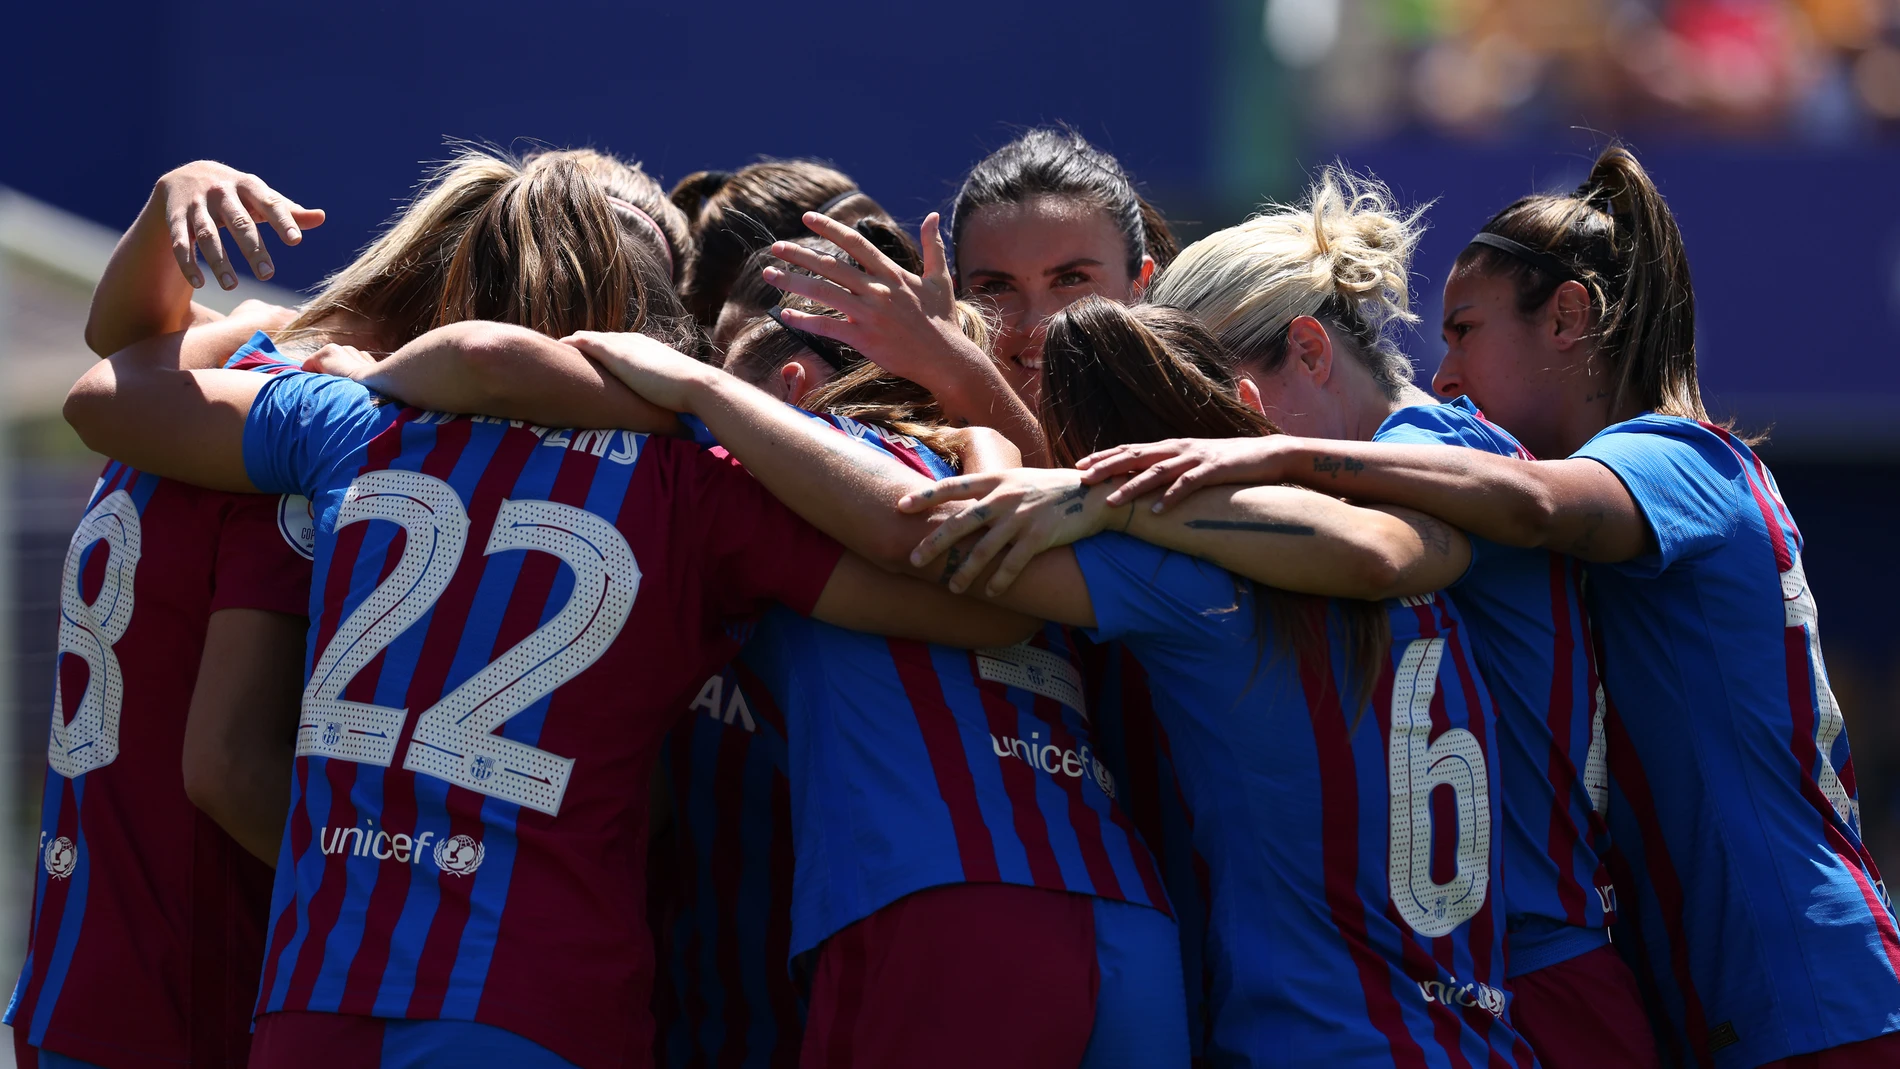 Ana-Maria Crnogorcevic of FC Barcelona celebrates a goal during the Final of the spanish women cup, Copa de la Reina, football match played between FC Barcelona and Sporting Club de Huelva on May 29, 2022, in Alcorcon, Madrid Spain.
AFP7 
29/05/2022 ONLY FOR USE IN SPAIN